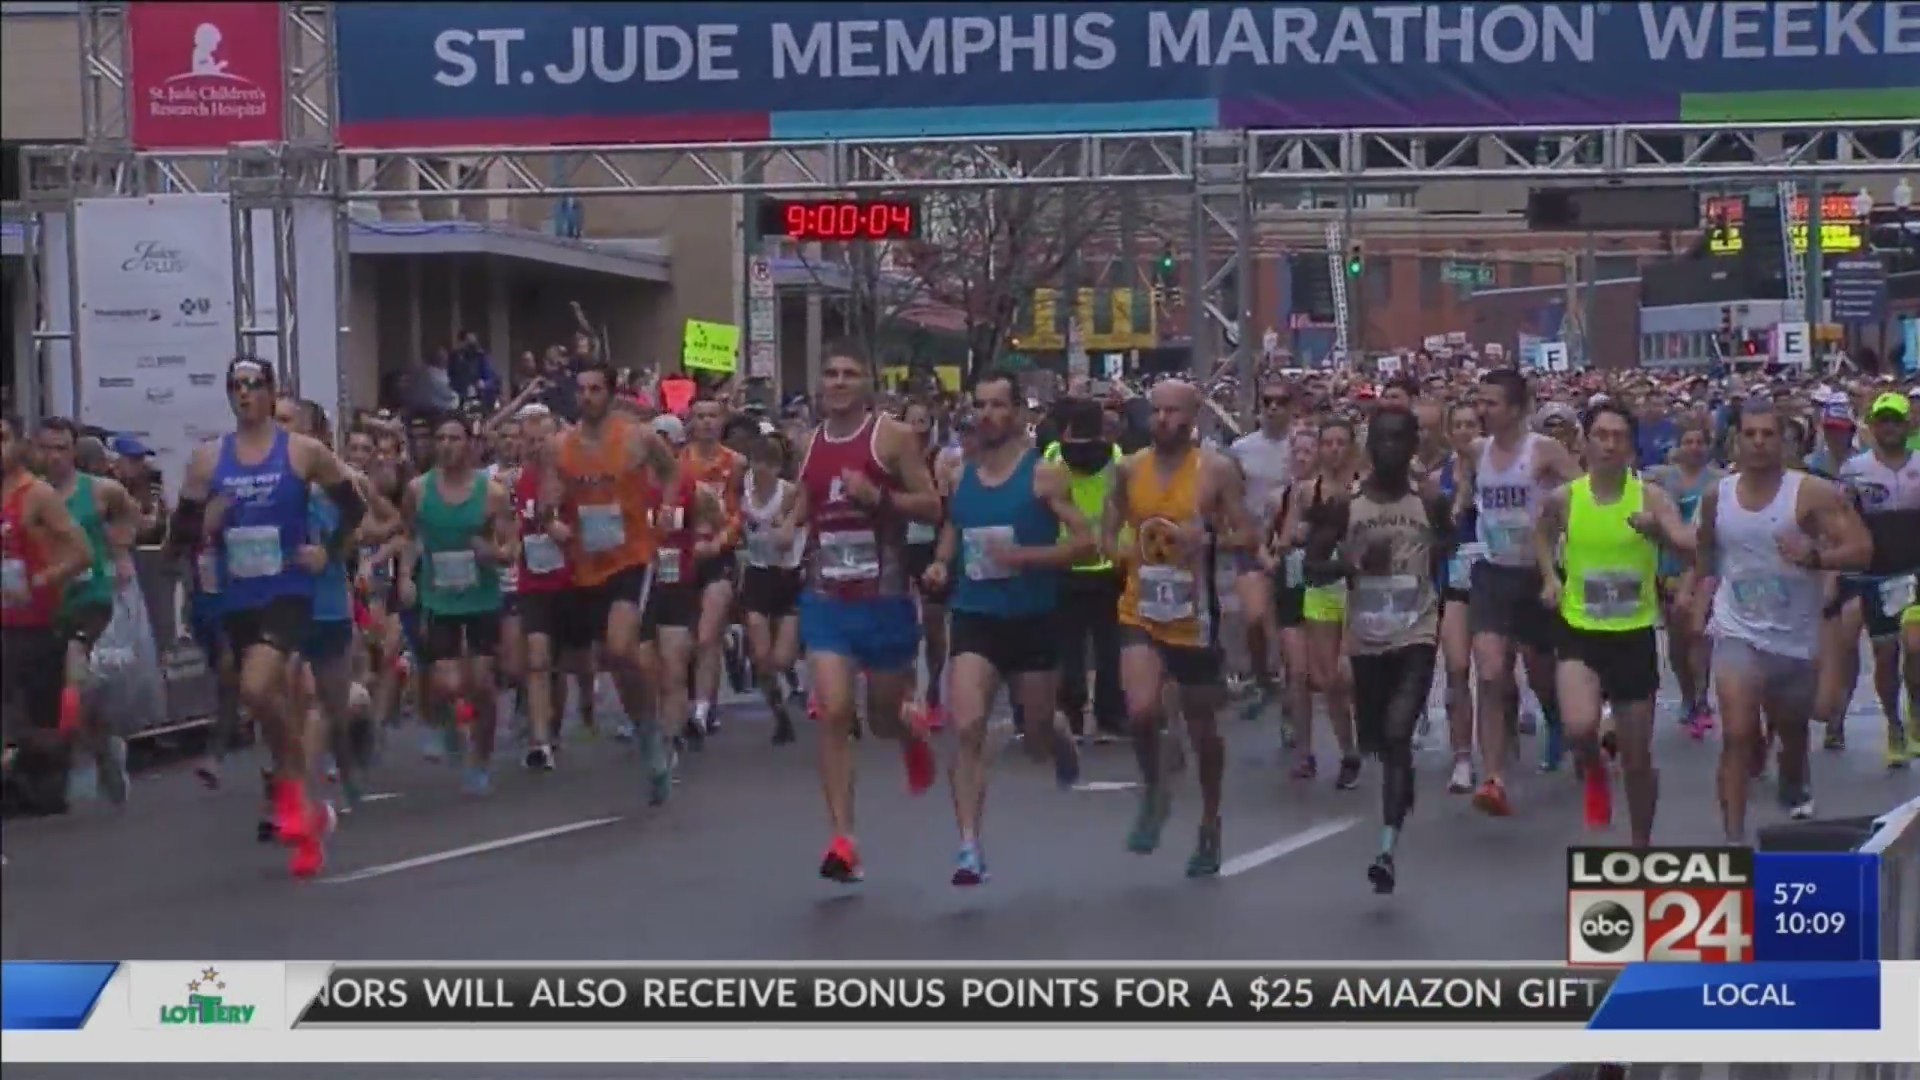 St. Jude Heroes share motivations to cross the finish line